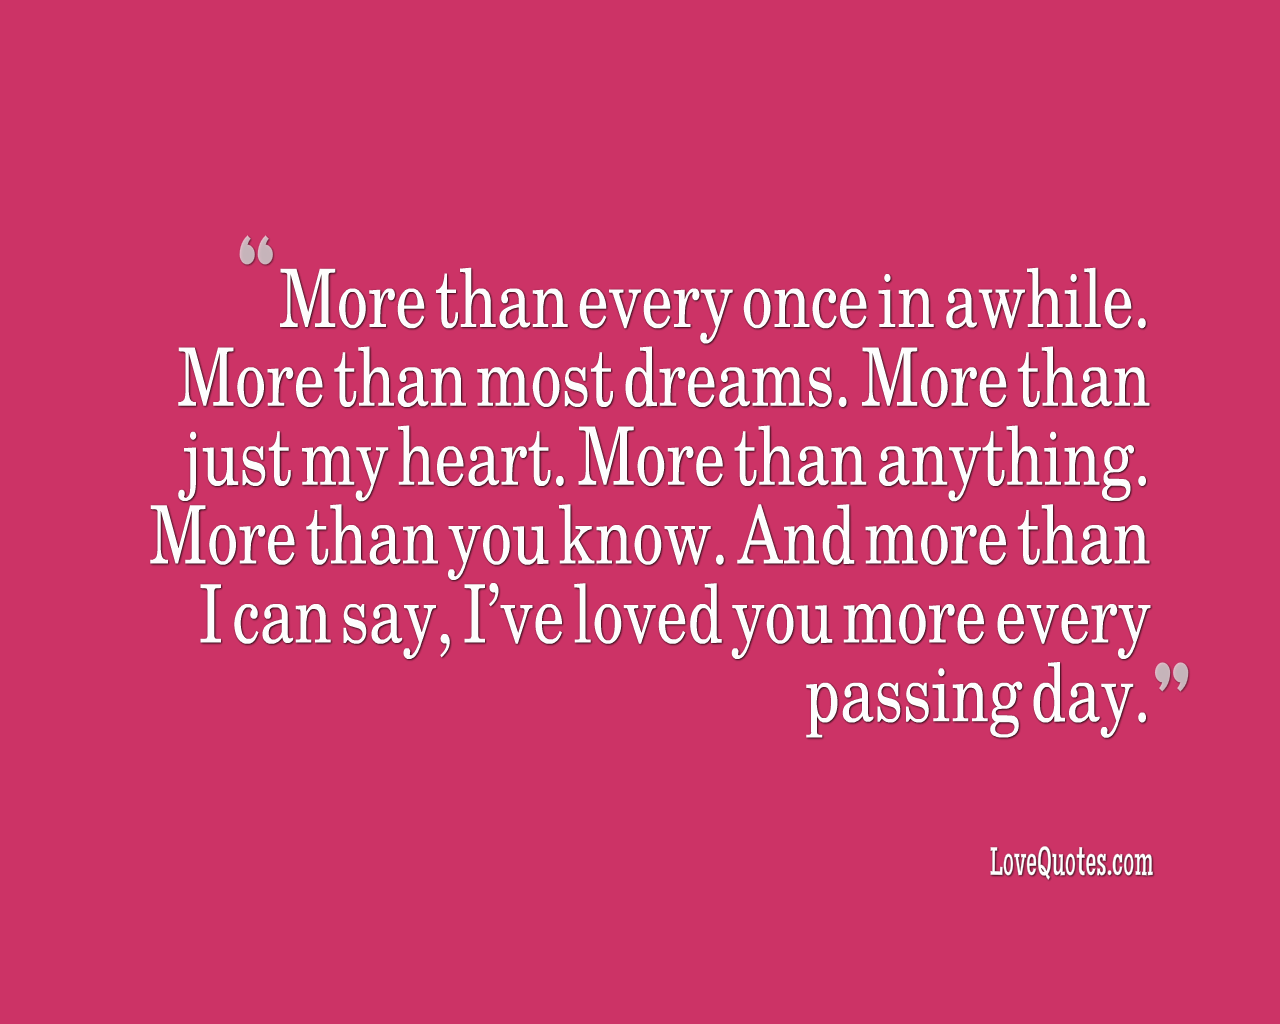 Every Passing Day - Love Quotes